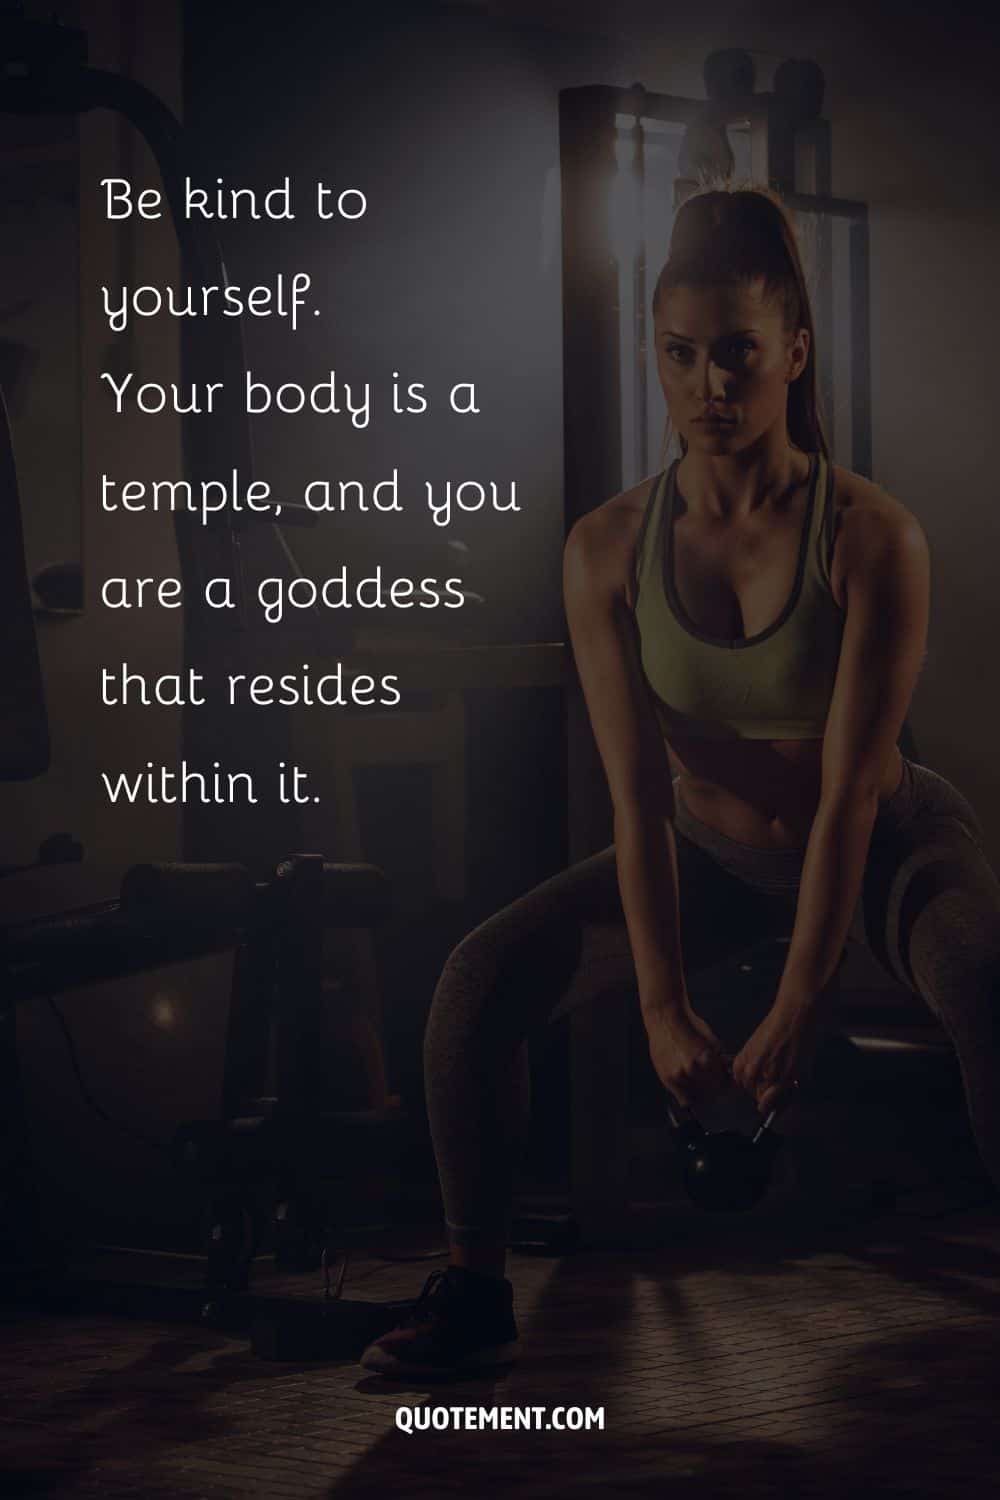 Your body is a temple, and you are a goddess that resides within it